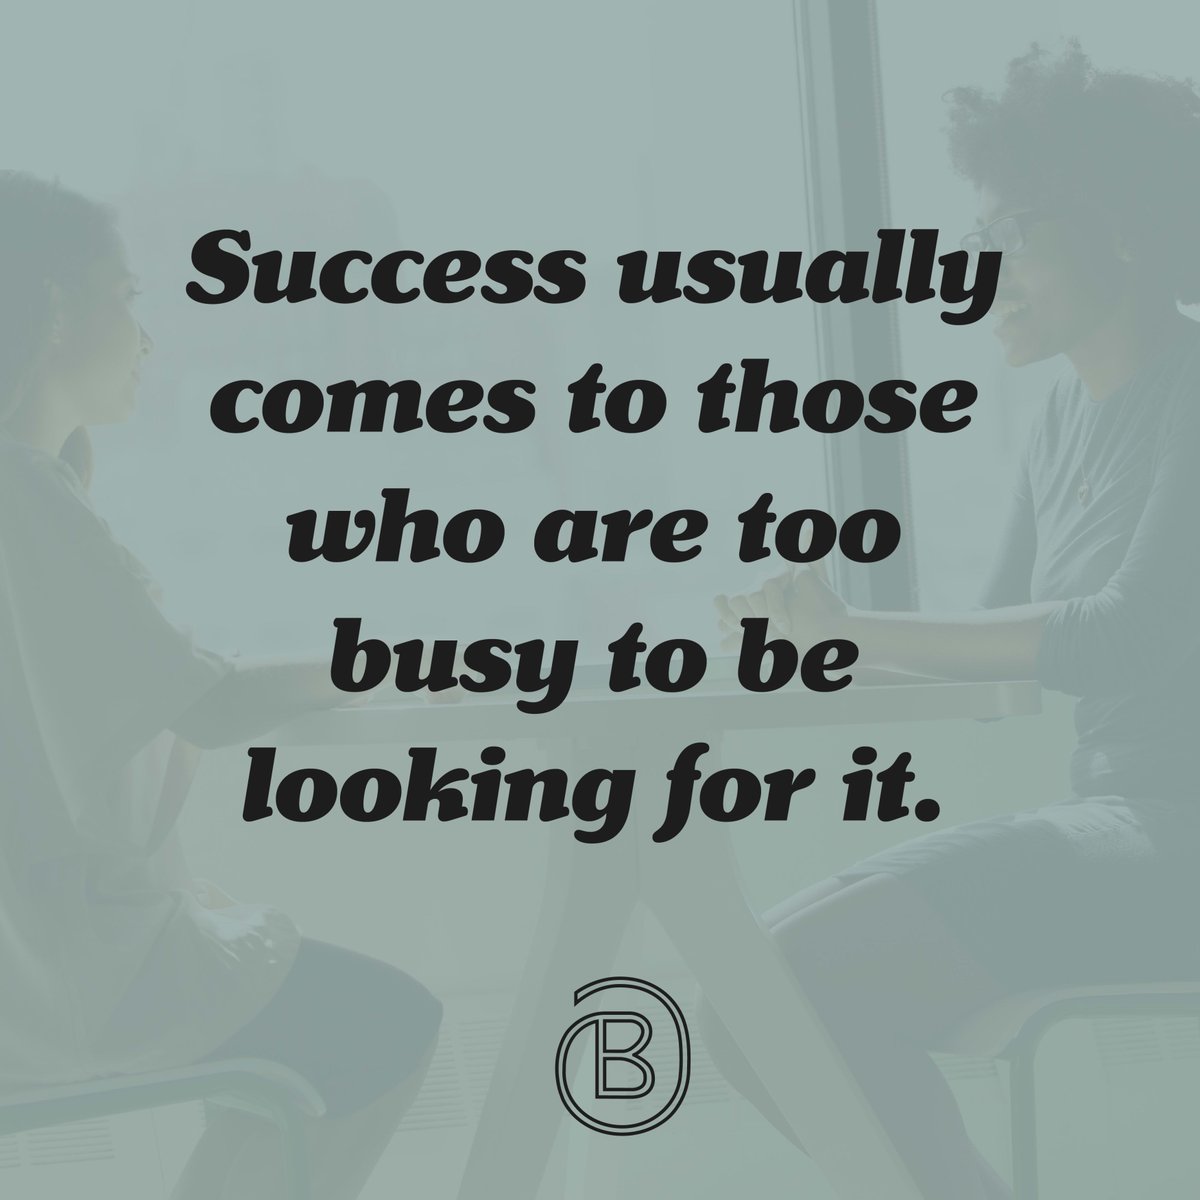 Success is for those hustling! 👊💼 Stay busy, stay focused, and watch as success finds you ☝️💯 #KeepHustling #SuccessMindset #KeepGoing #HustleHard #DreamBig #HustleModeOn